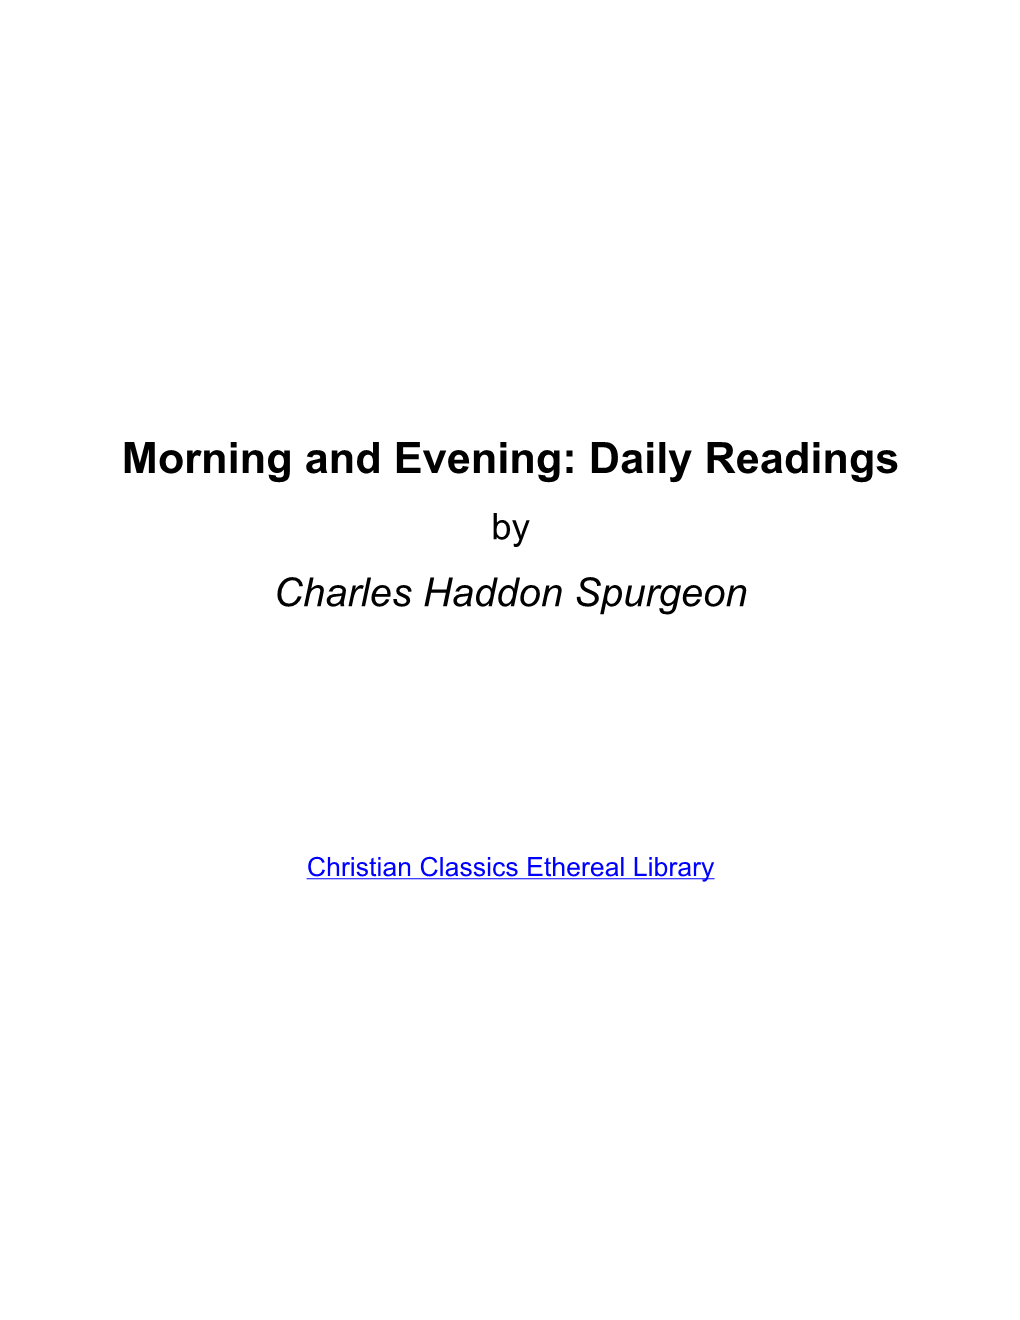 Morning and Evening: Daily Readings by Charles Haddon Spurgeon